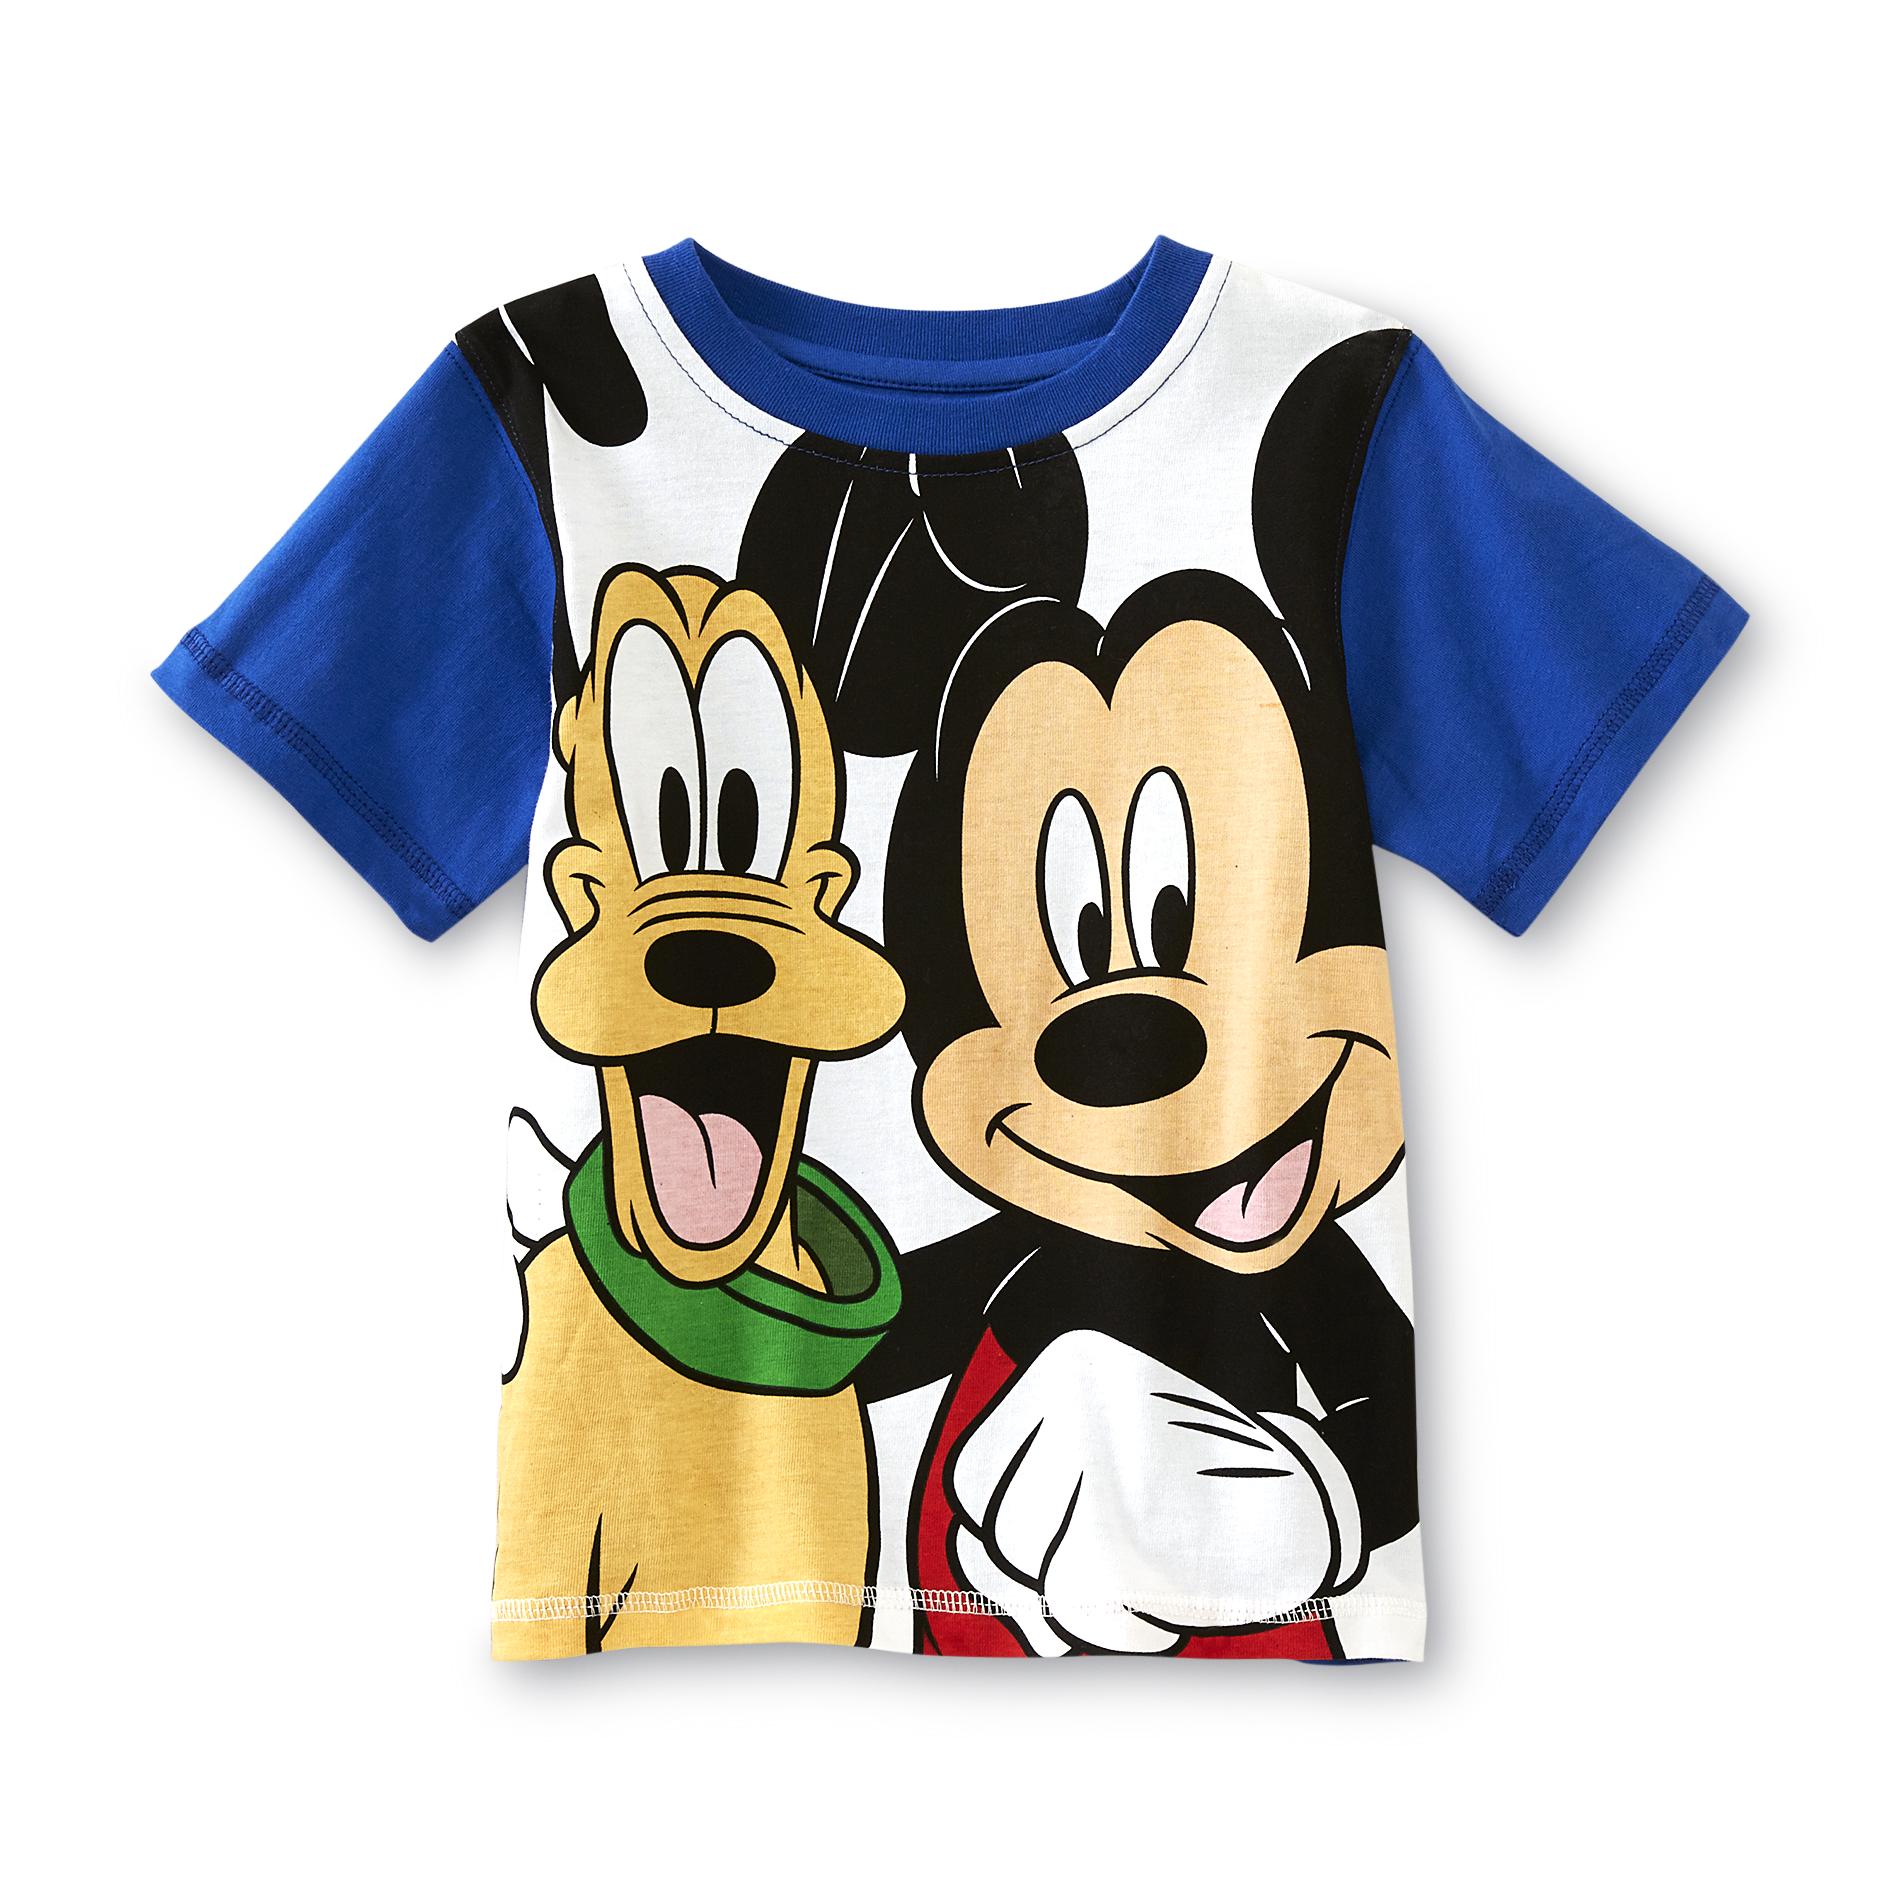 Disney Mickey Mouse Infant & Toddler Boy's Graphic T-Shirt